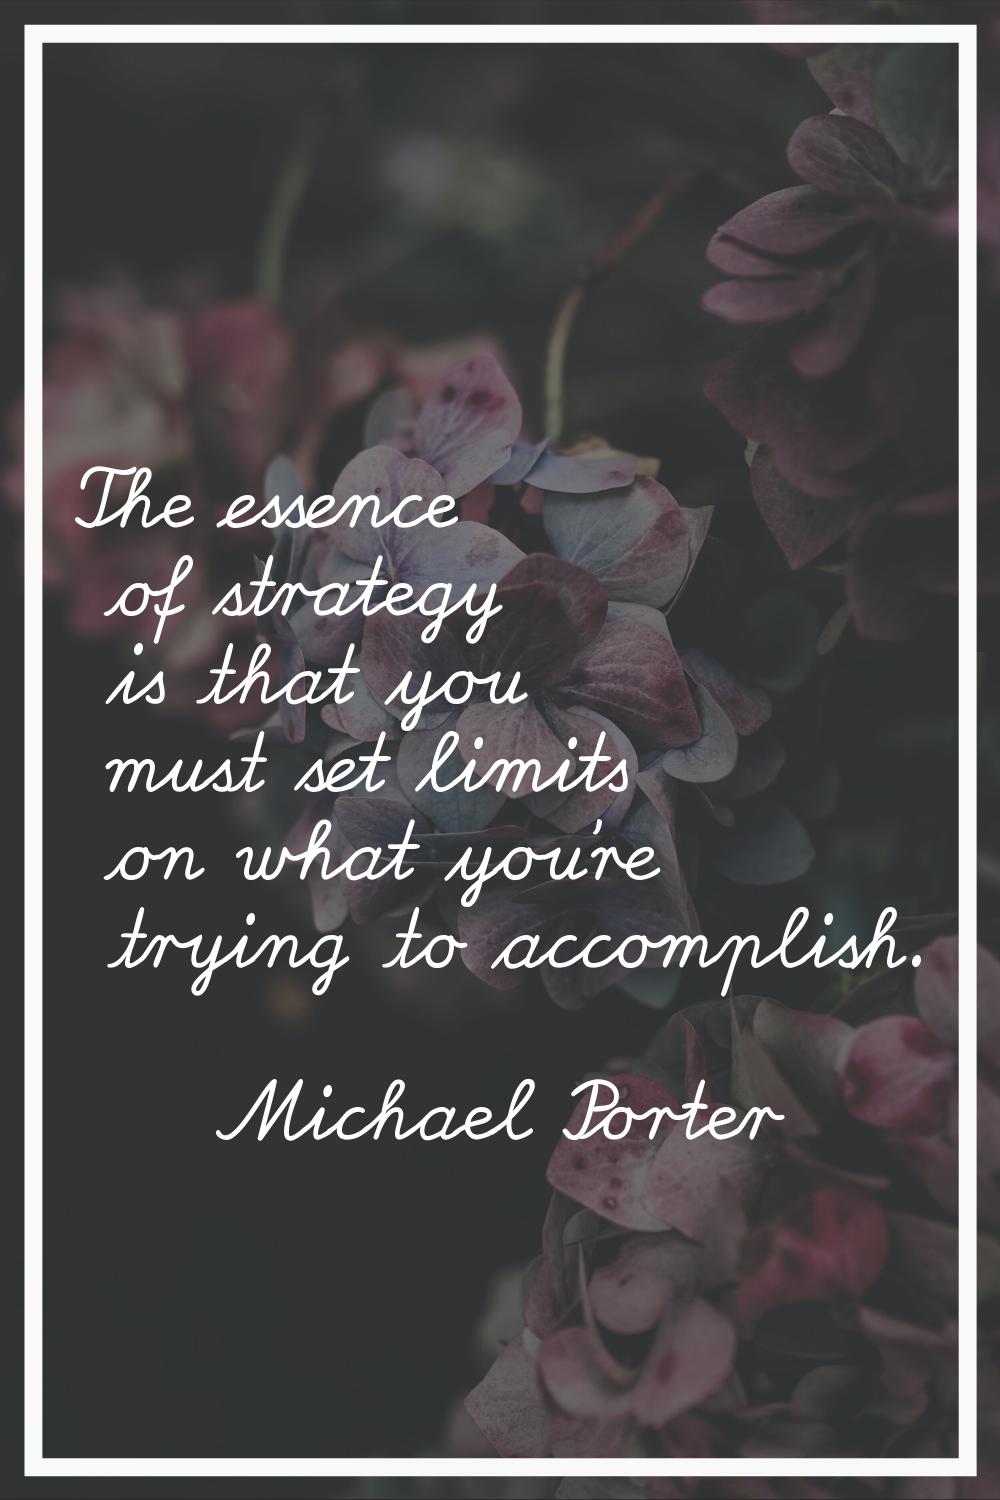 The essence of strategy is that you must set limits on what you're trying to accomplish.